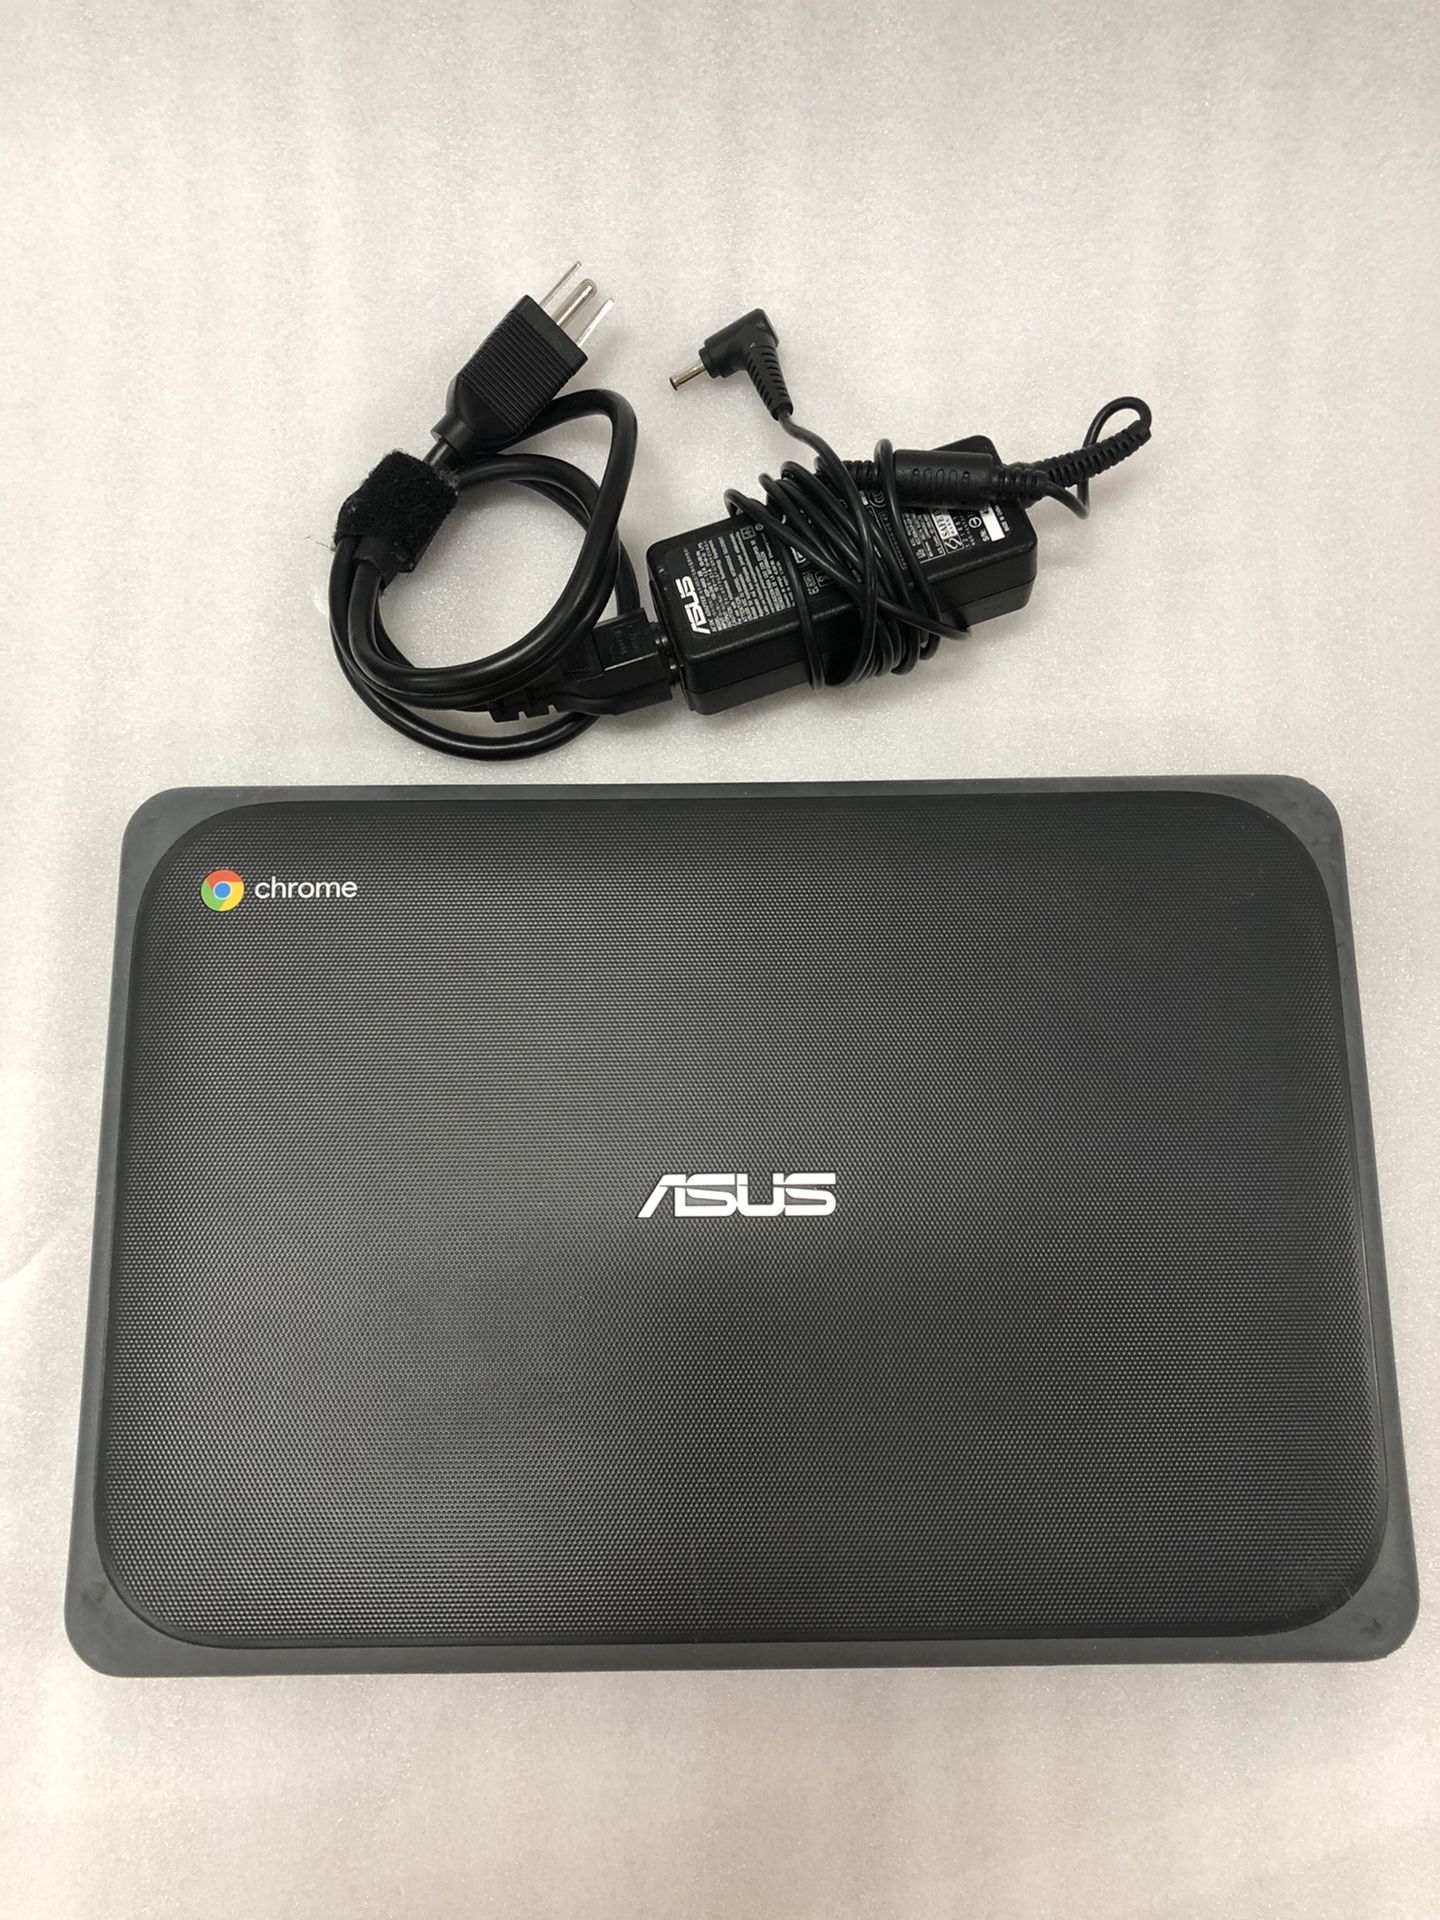 ASUS C202SA Chromebook and Charger Chrome Notebook Laptop 